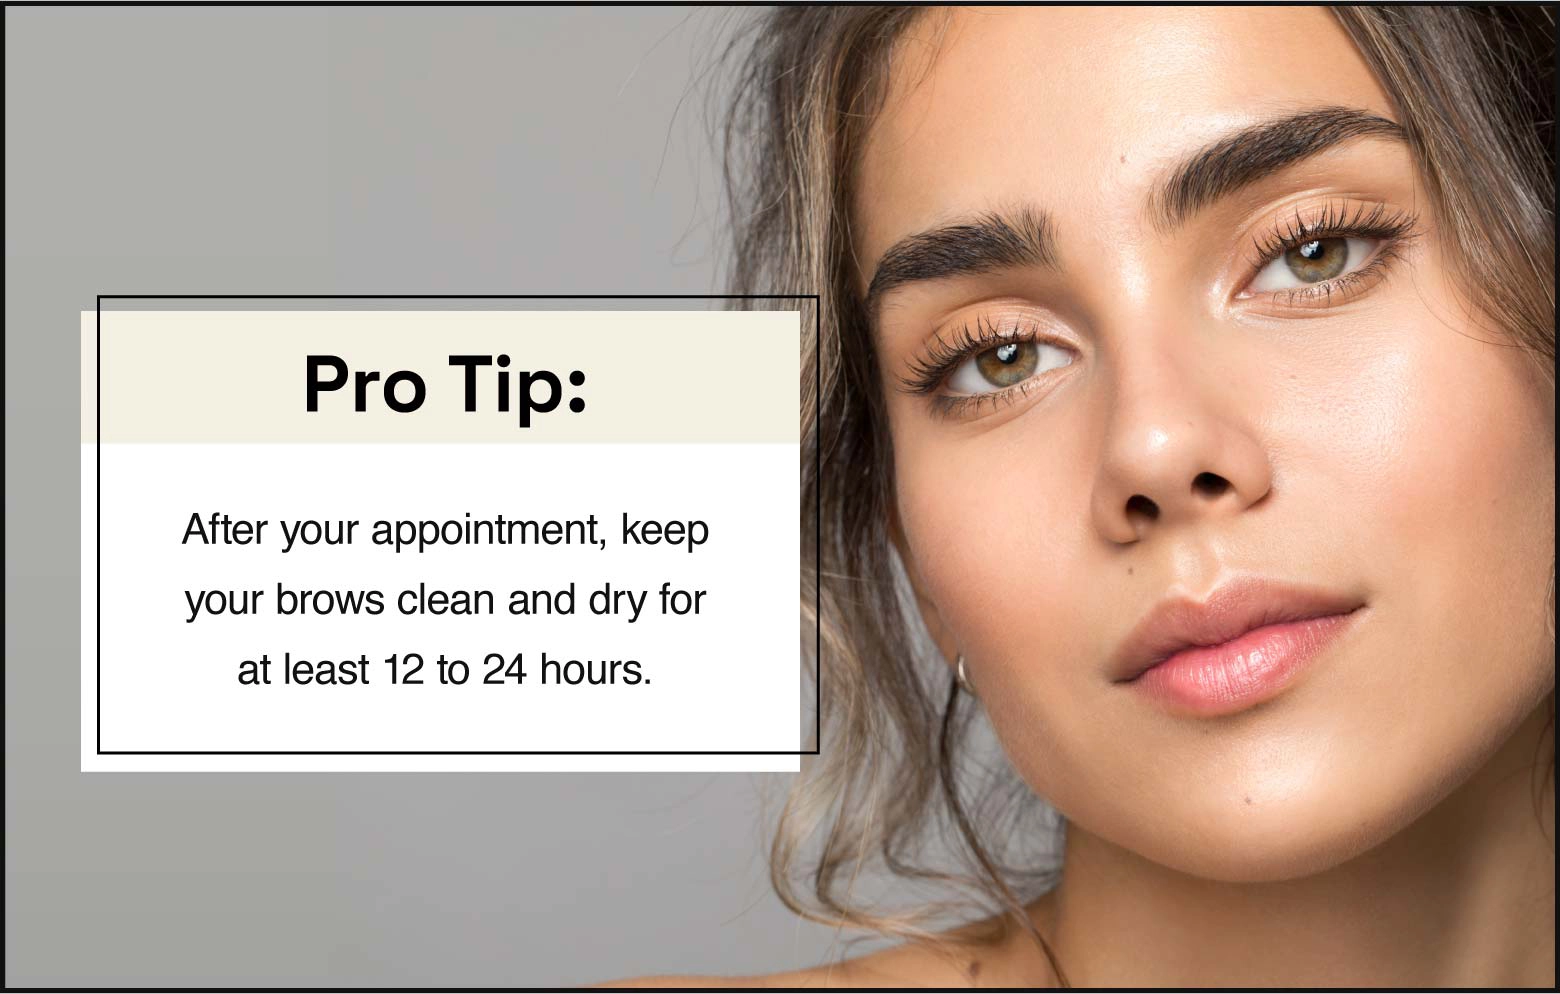 After your appointment, keep your brows clean and dry for 12 to 24 hours.